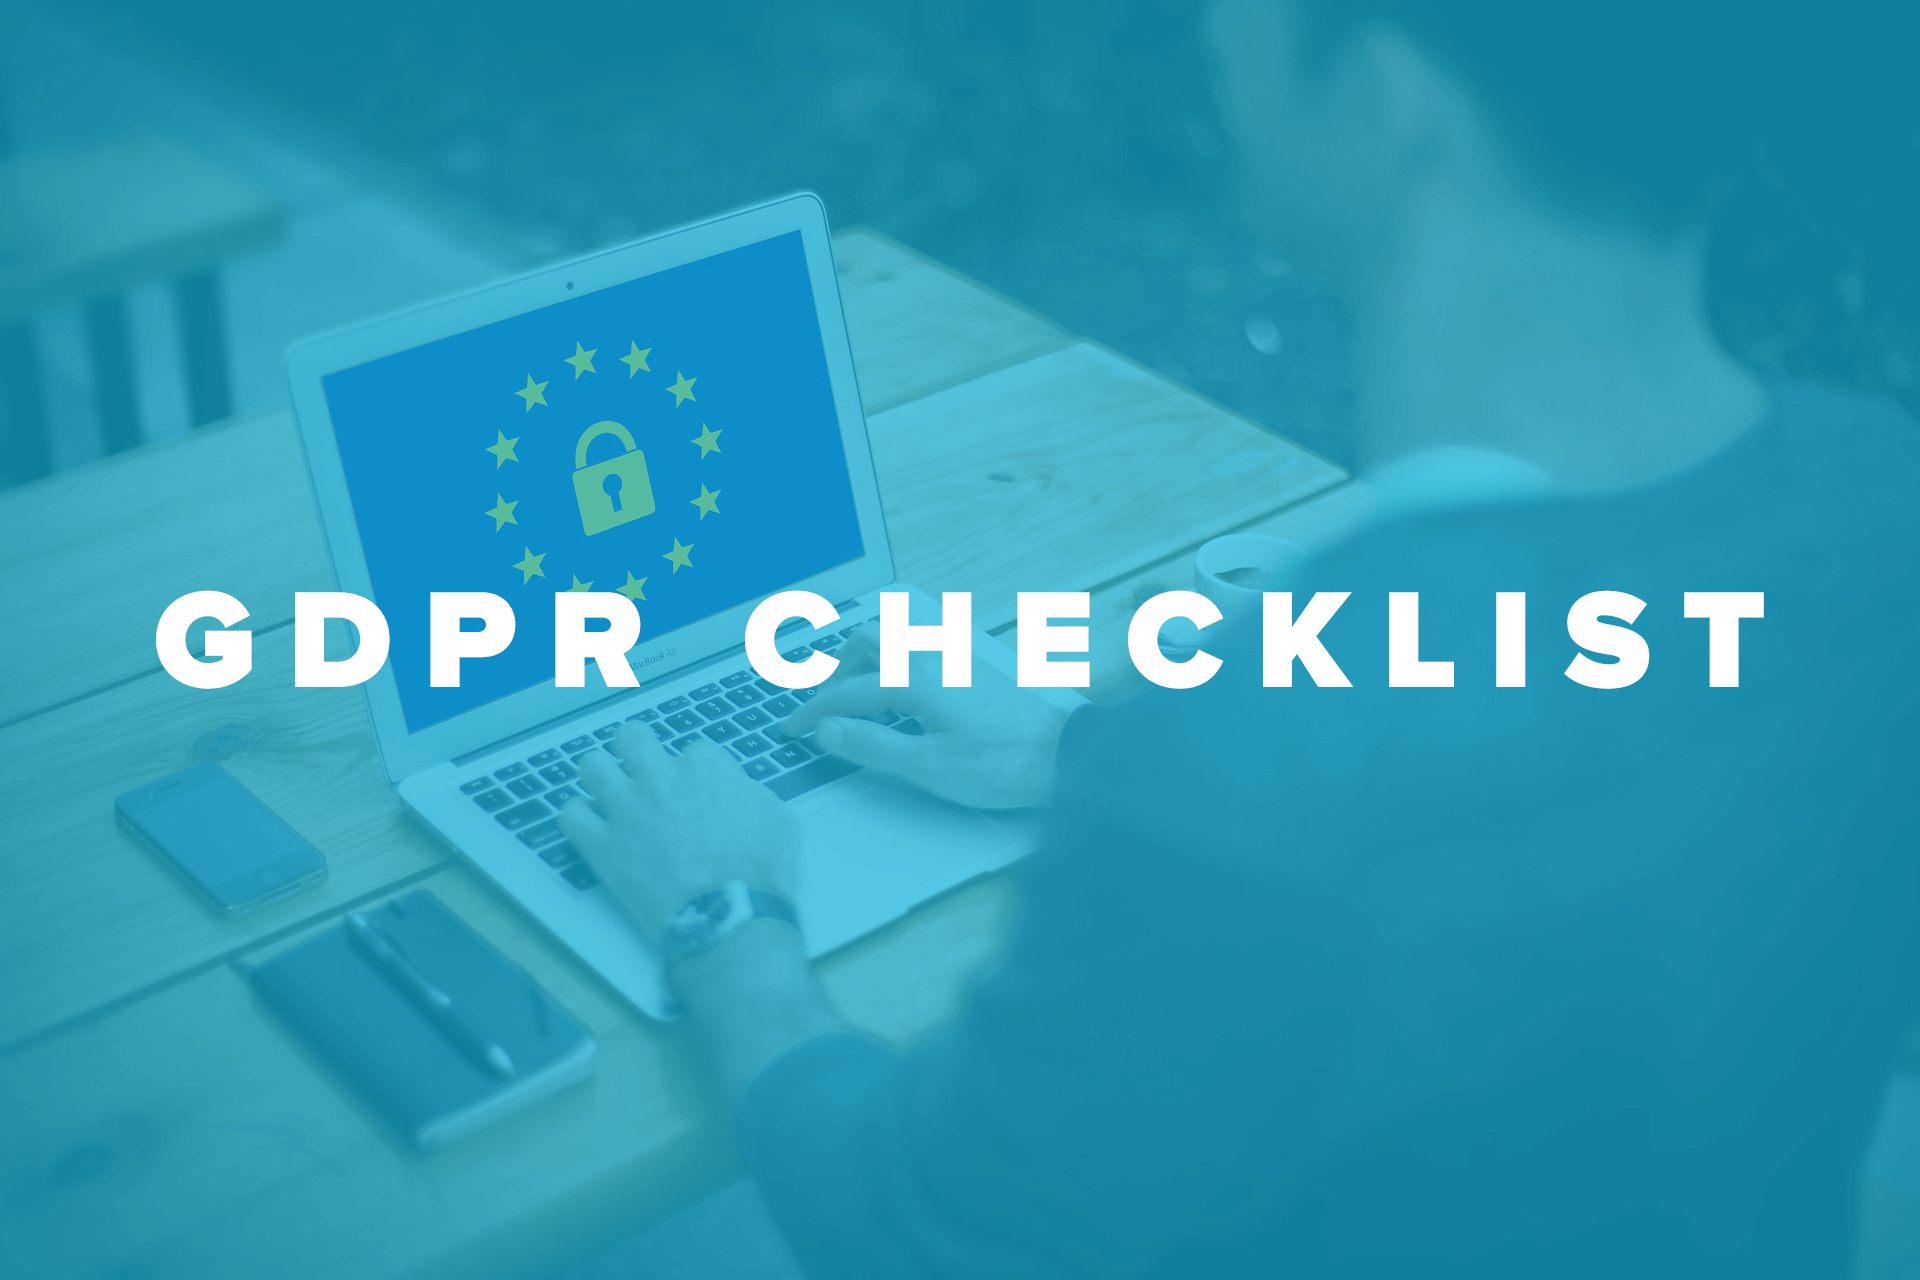 Should I care about GDPR? The GDPR checklist.